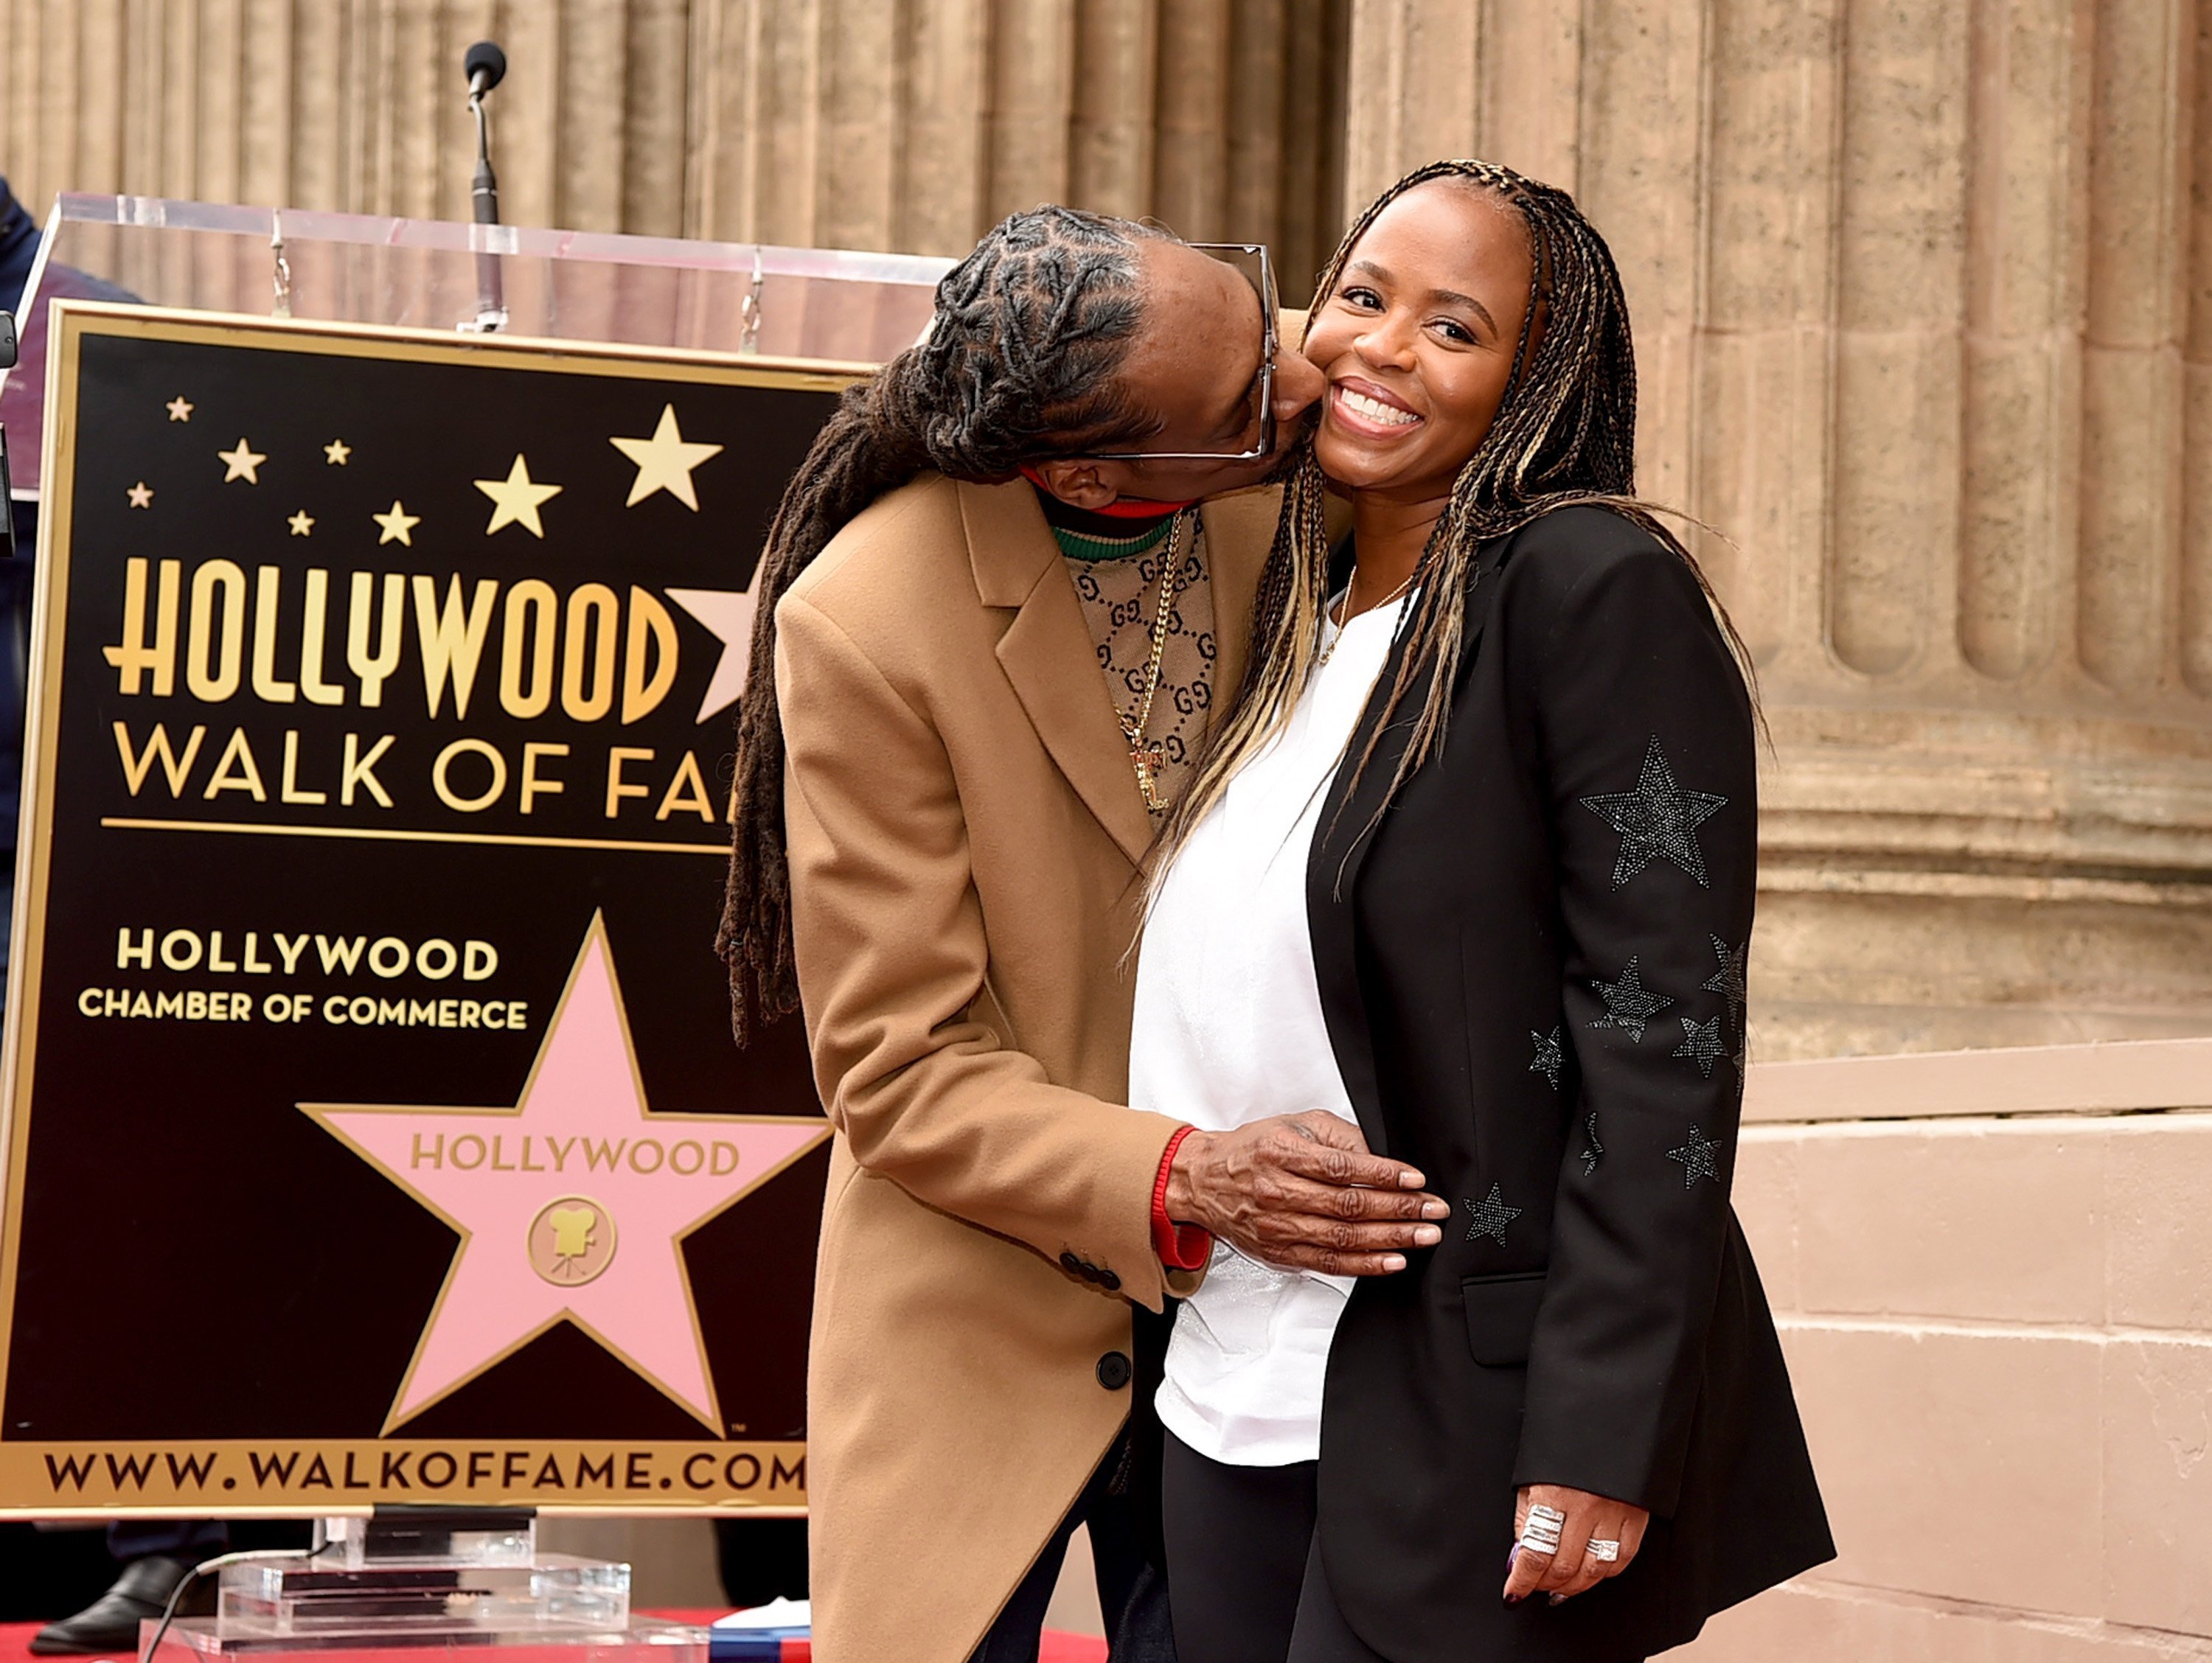 Snoop Dogg and his wife Shante Broadus at The Hollywood Walk Of Fame on Hollywood Boulevard on November 19, 2018. | Photo: Getty Images